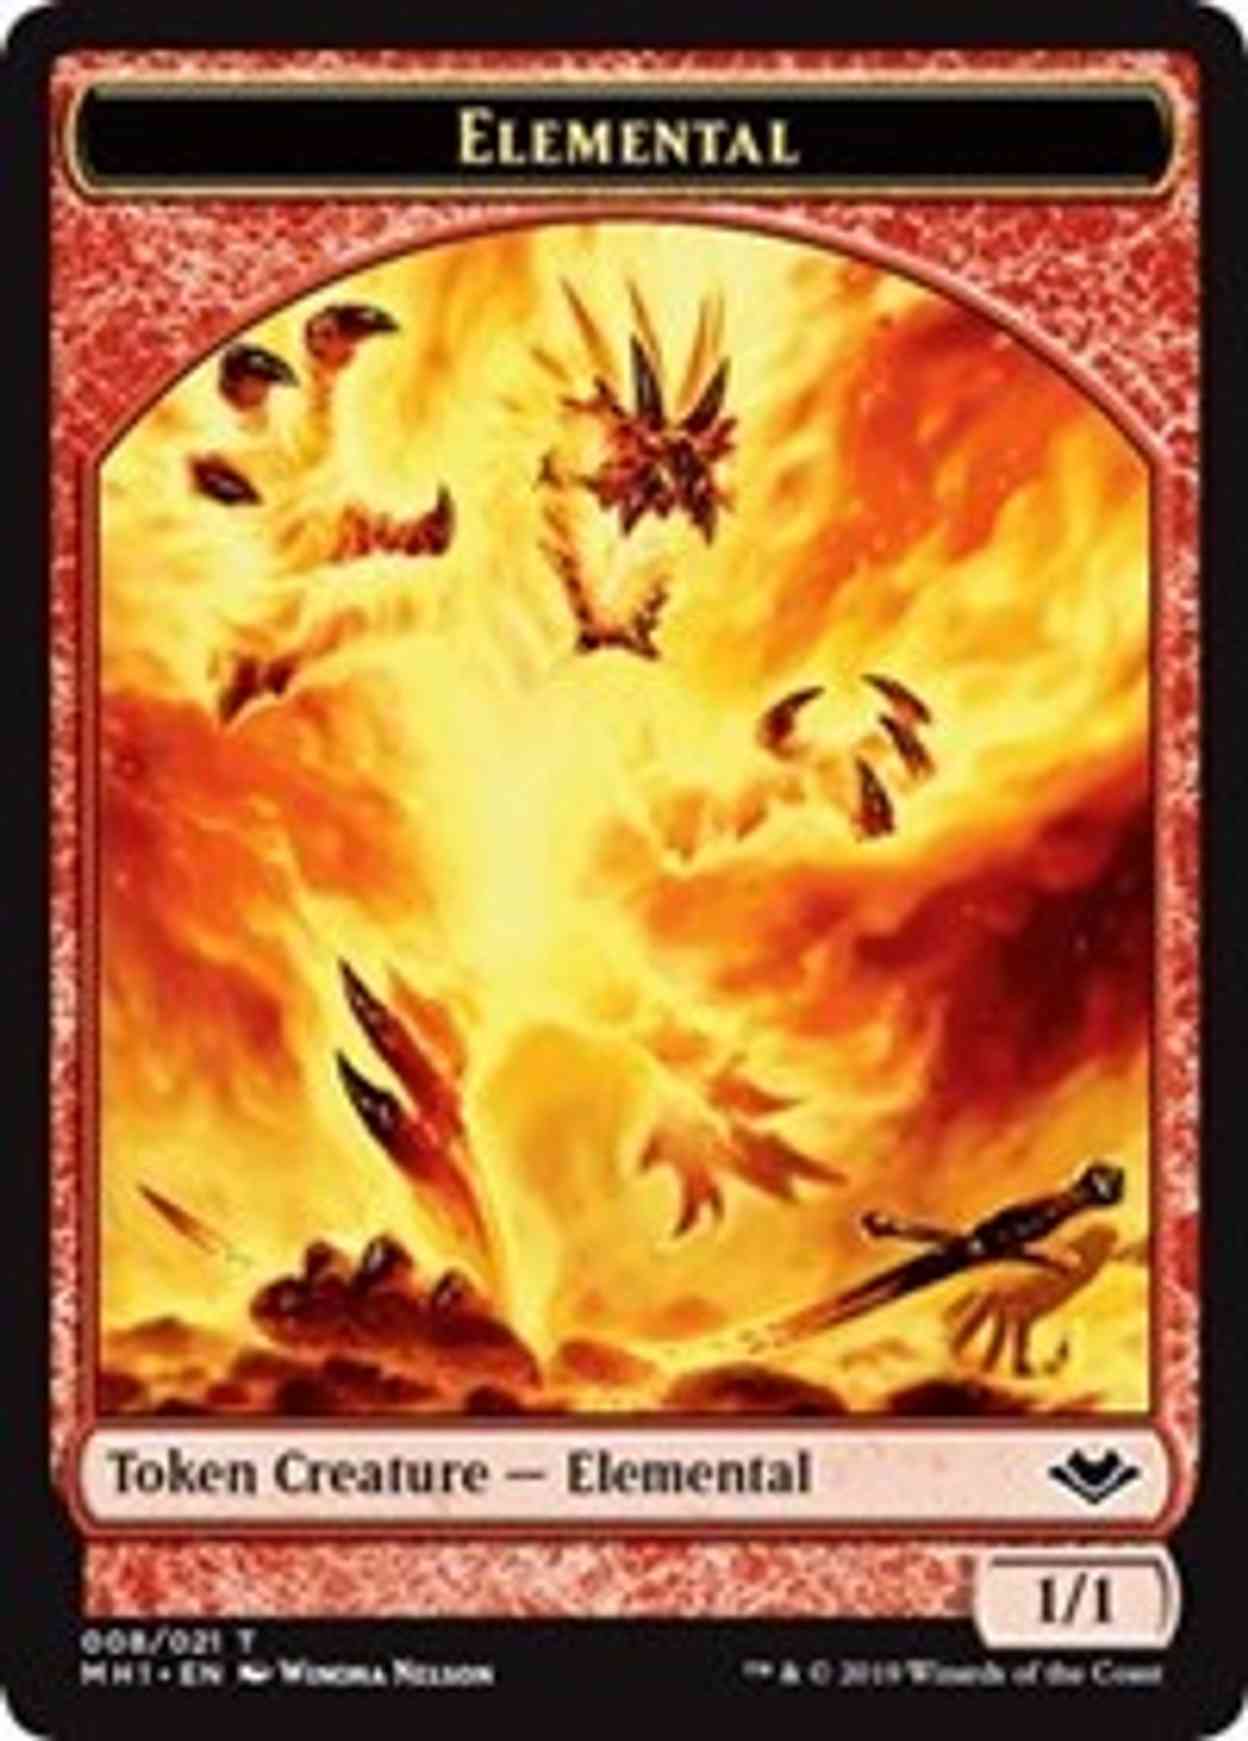 Elemental (008) // Squirrel (015) Double-sided Token magic card front